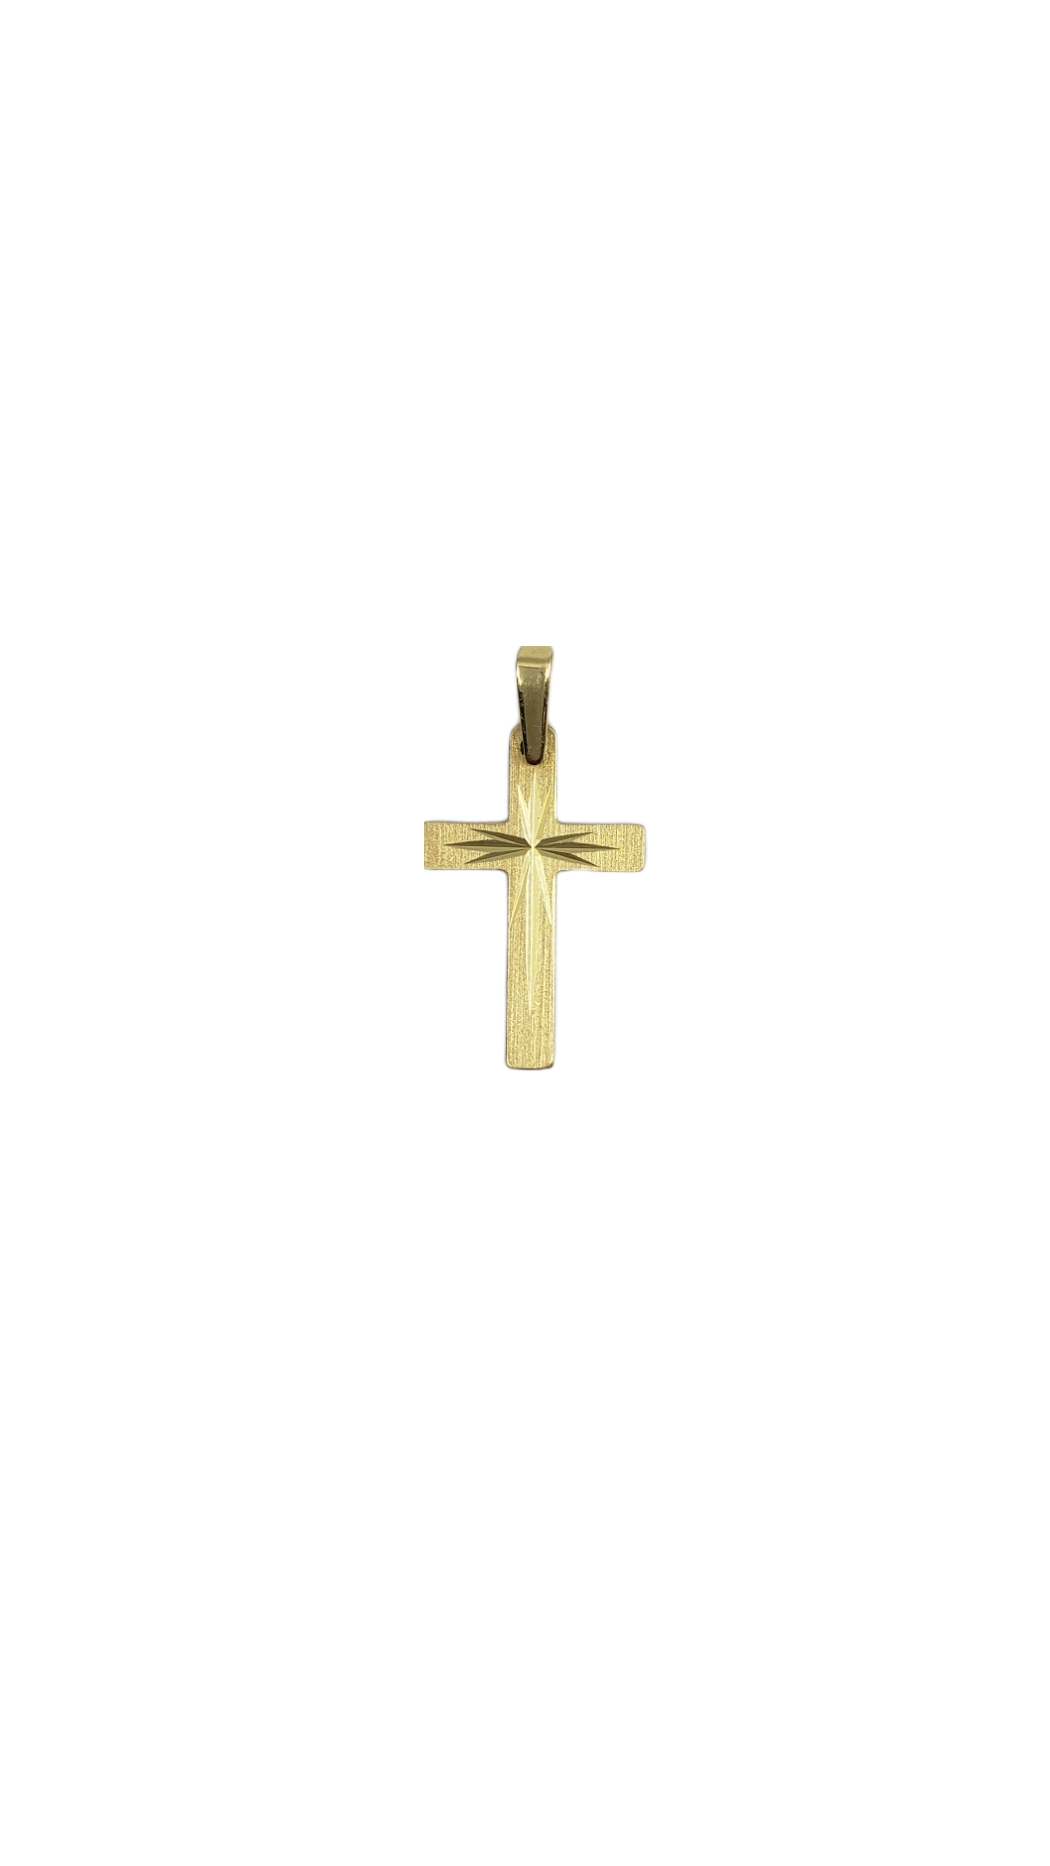 10K Yellow Gold with Etched Center Cross Charm - 19mm x 12mm